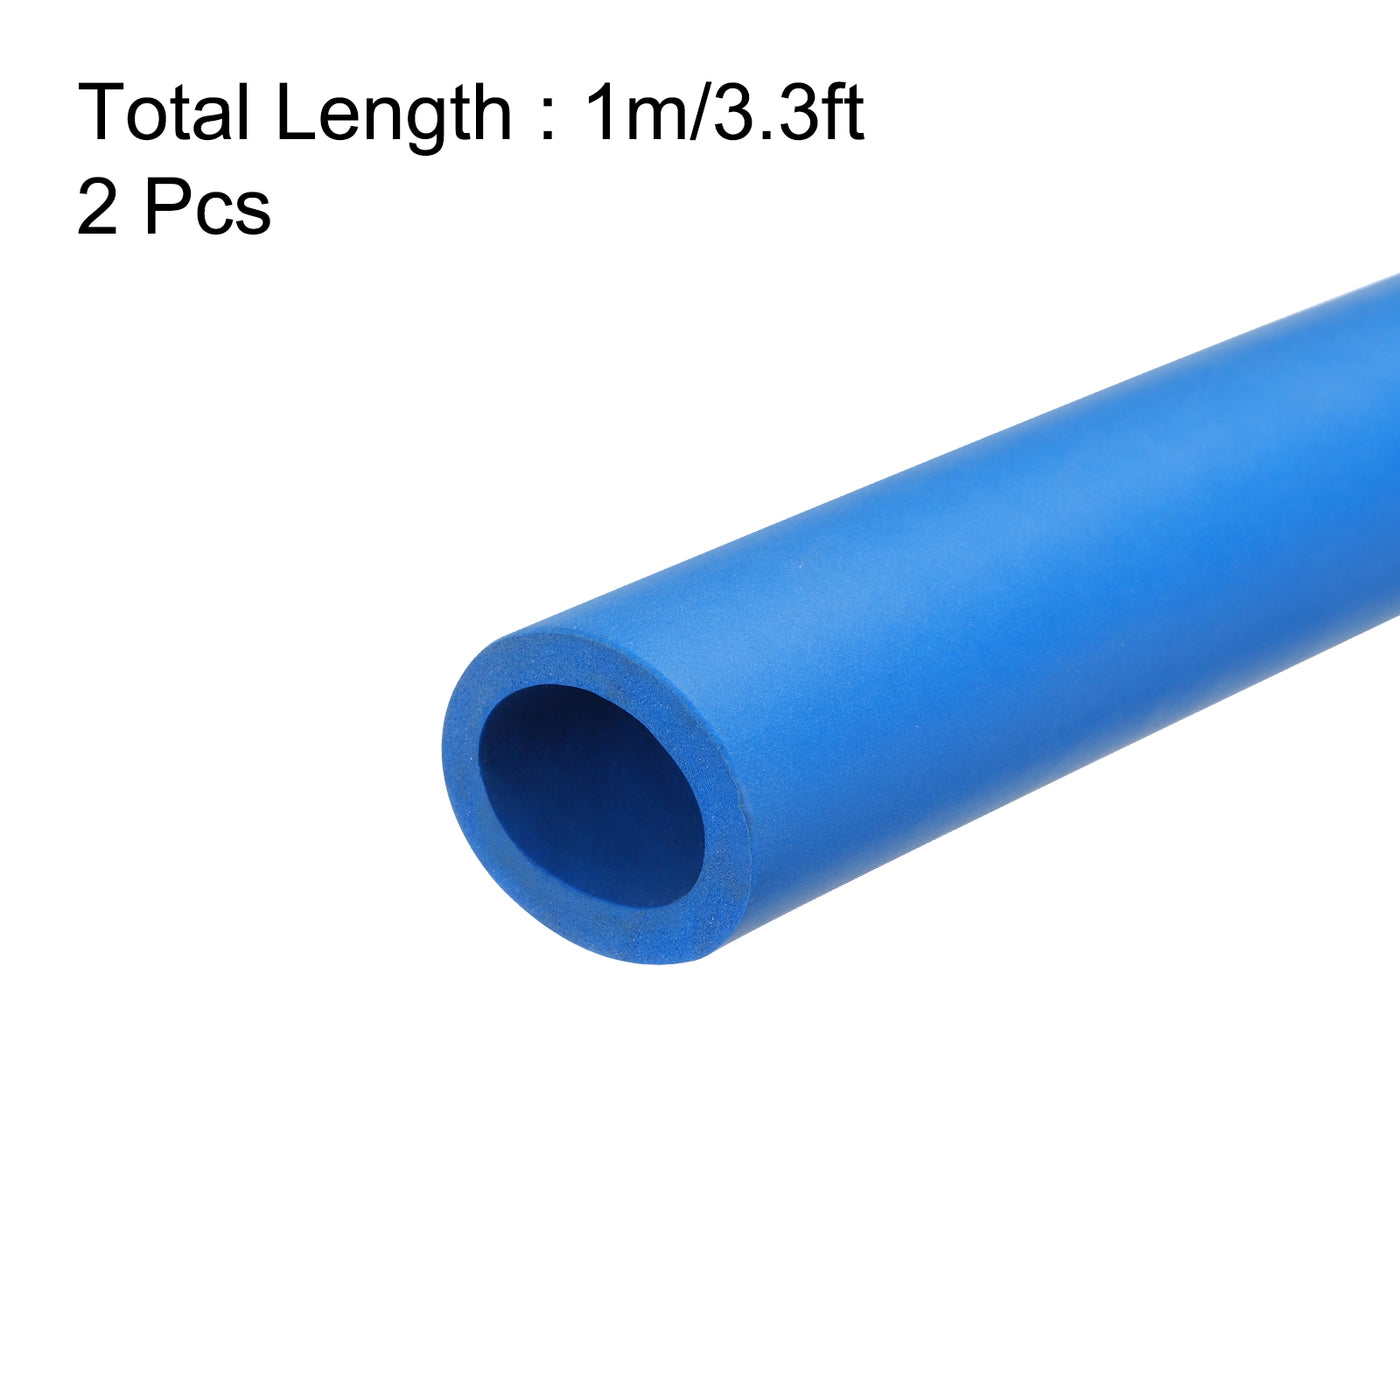 uxcell Uxcell 2pcs 3.3ft Pipe Insulation Tube 7/8 Inch(22mm) ID 32mm OD Foam Tubing for Handle Grip Support, Blue